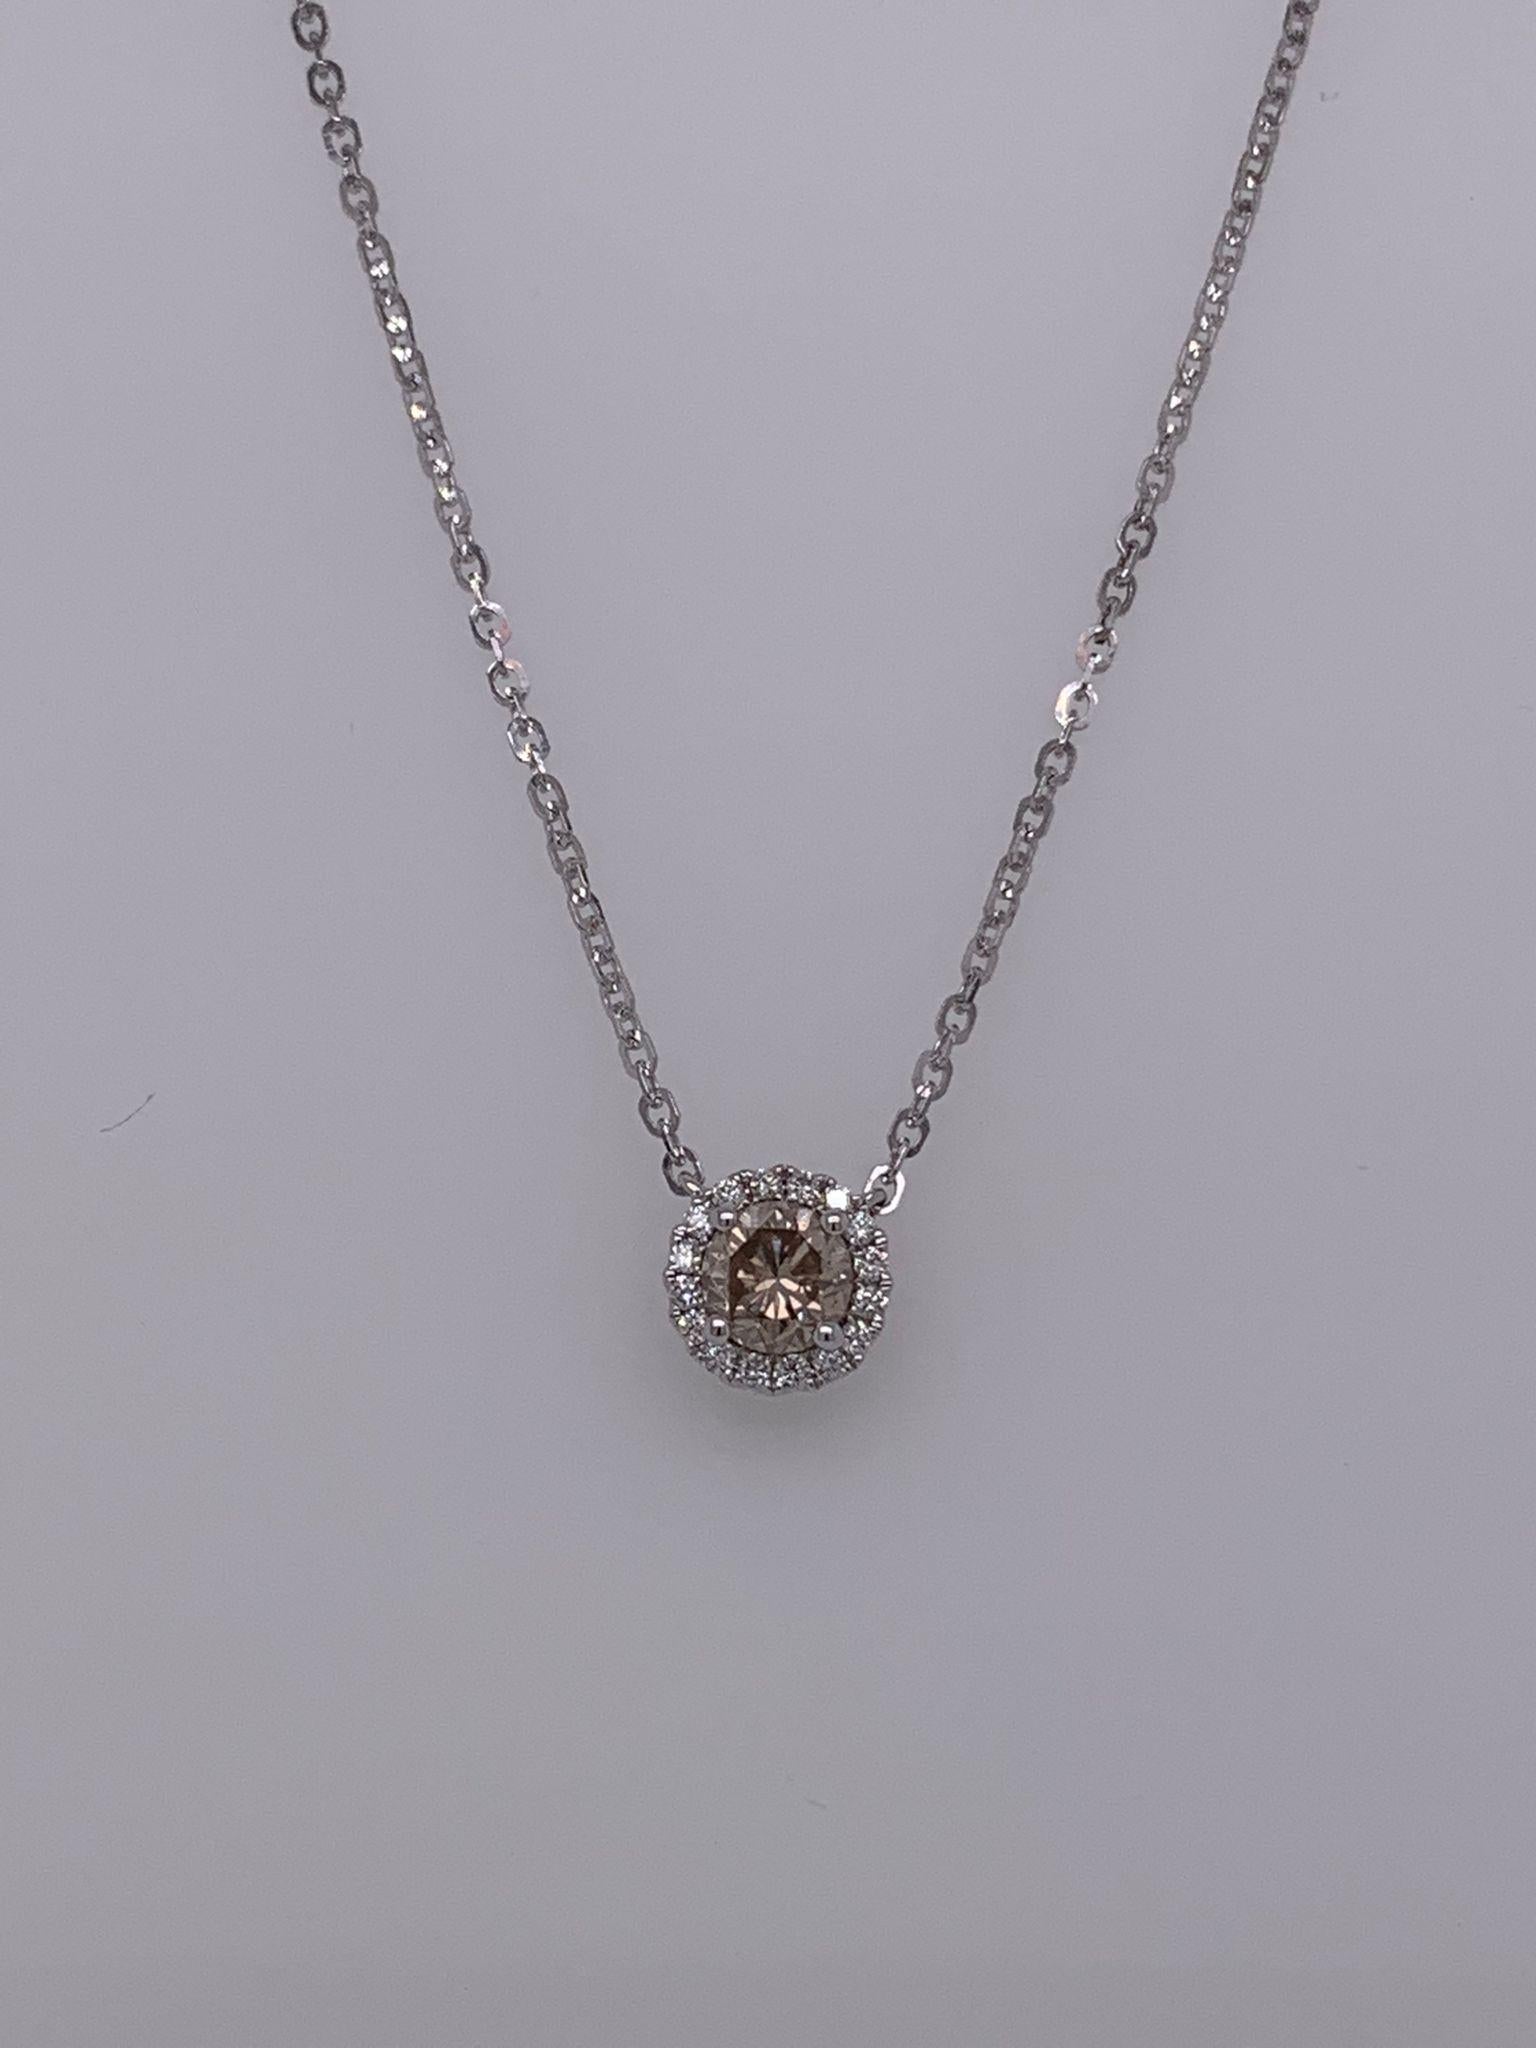 Champagne Diamond weighing .55 cts
Diamonds weighing .10 cts
set in 14K white gold
